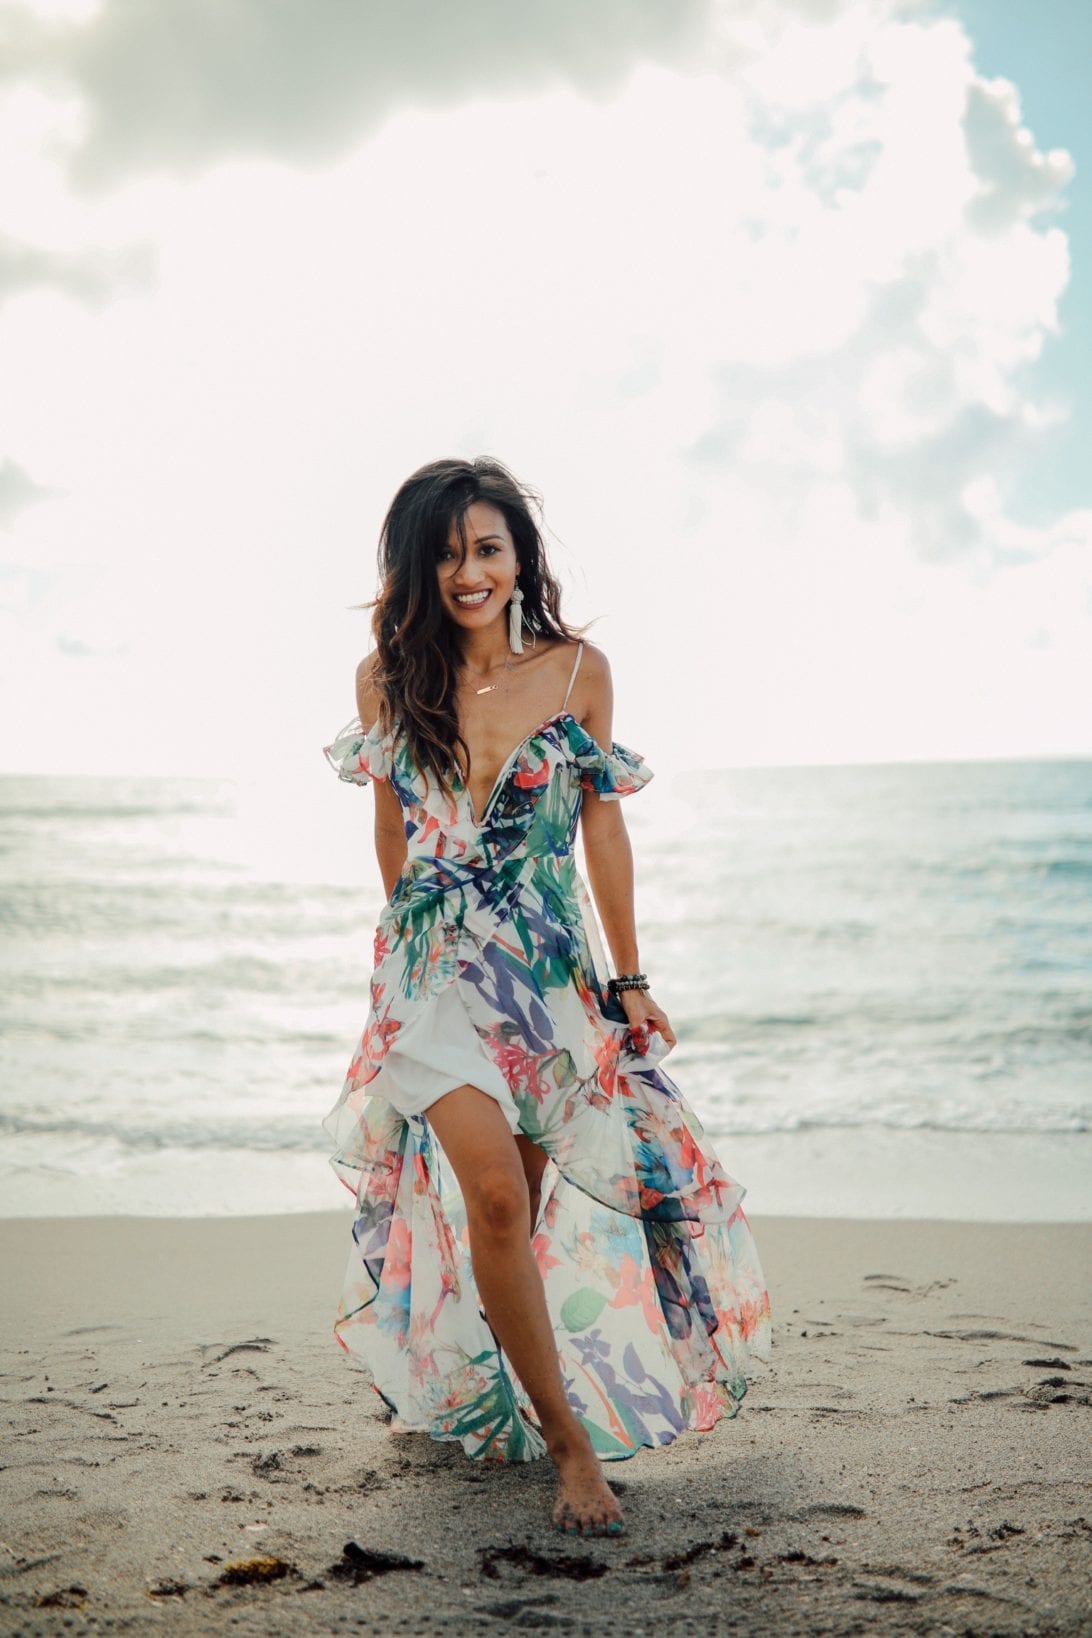 beach photoshoot, what to wear on the beach, what to wear at a photoshoot, ruffle maxi, floral maxi, beach style, summer dresses under $50, beach model, how to model, model poses